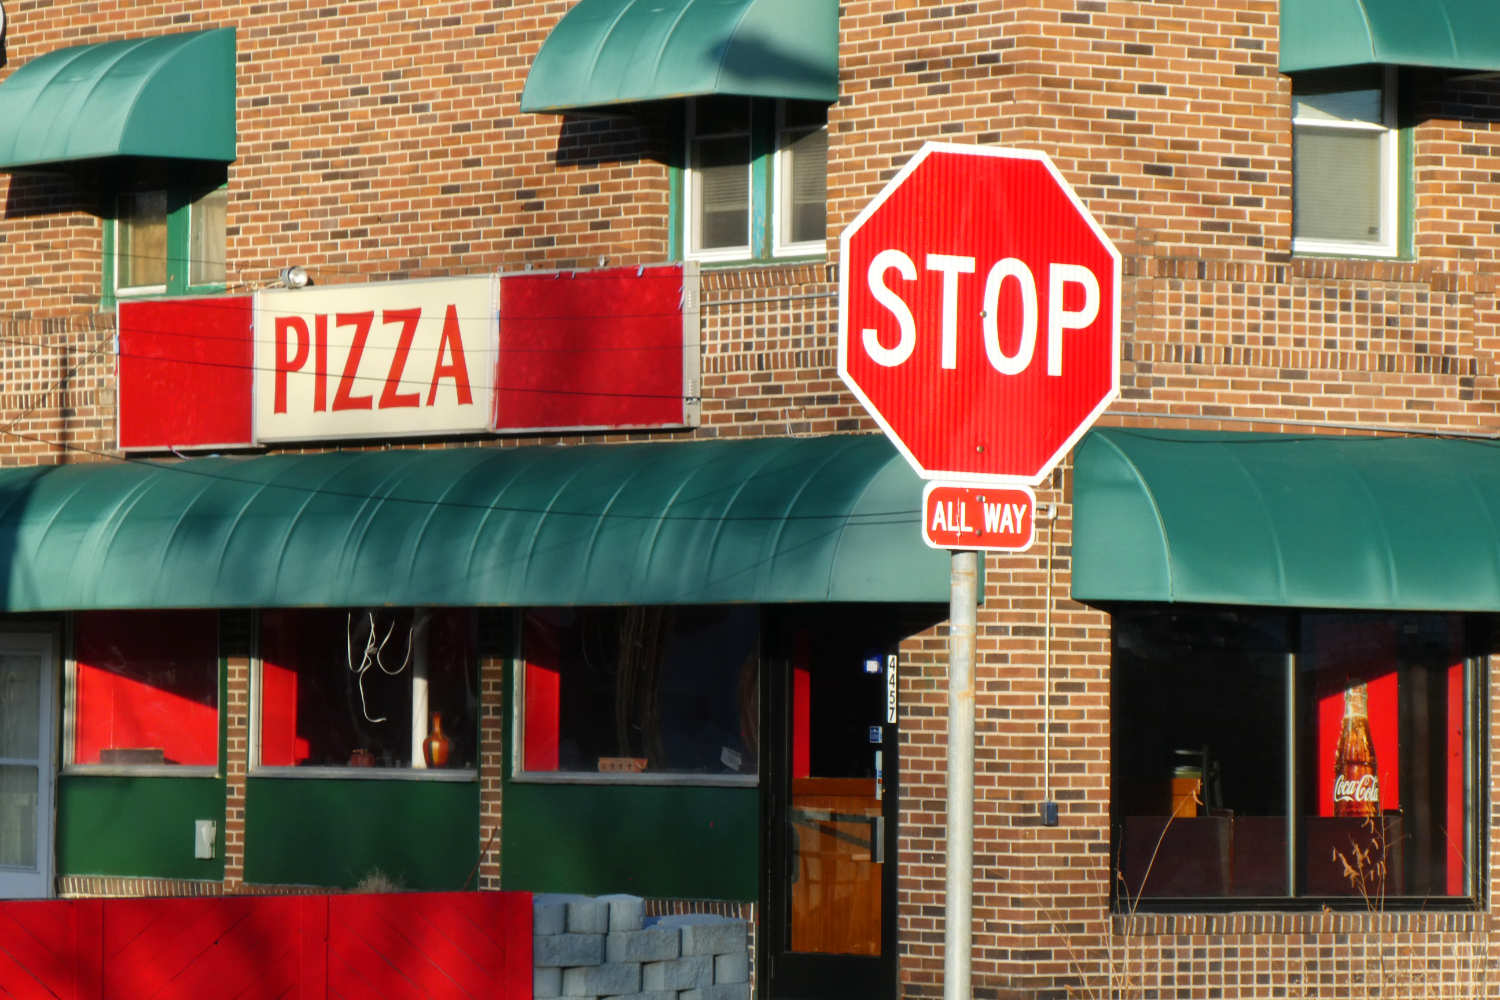 Red and white pizza sign on building with STOP sign in foreground